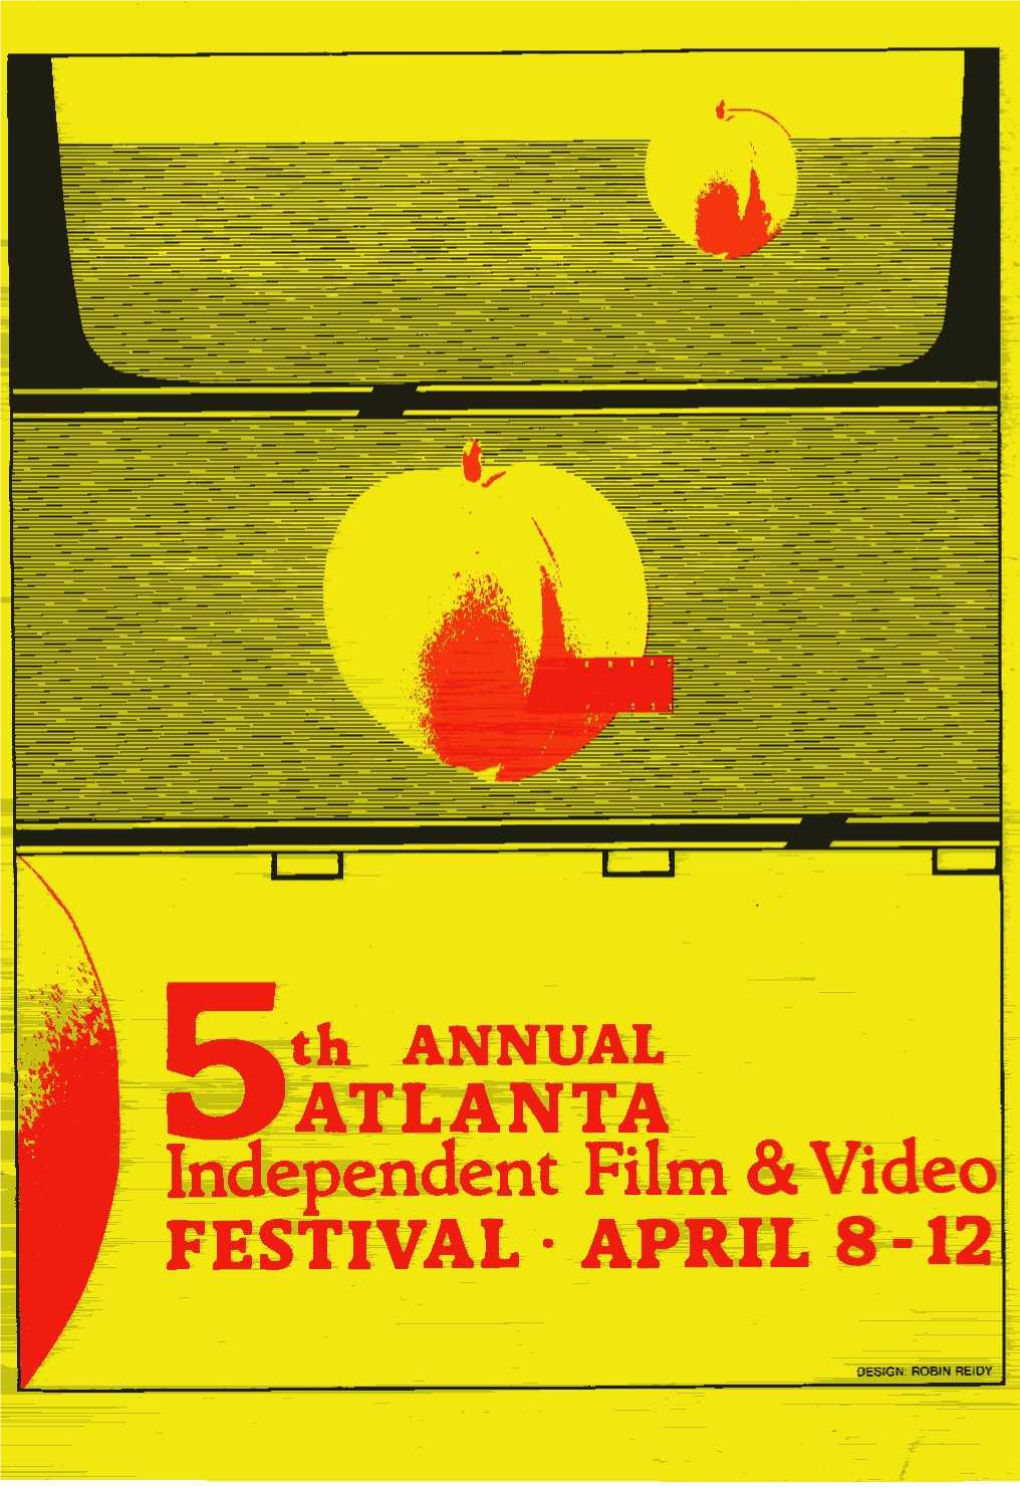 5Th ANNUAL ATLANTA Independent Film and Video FESTIVAL